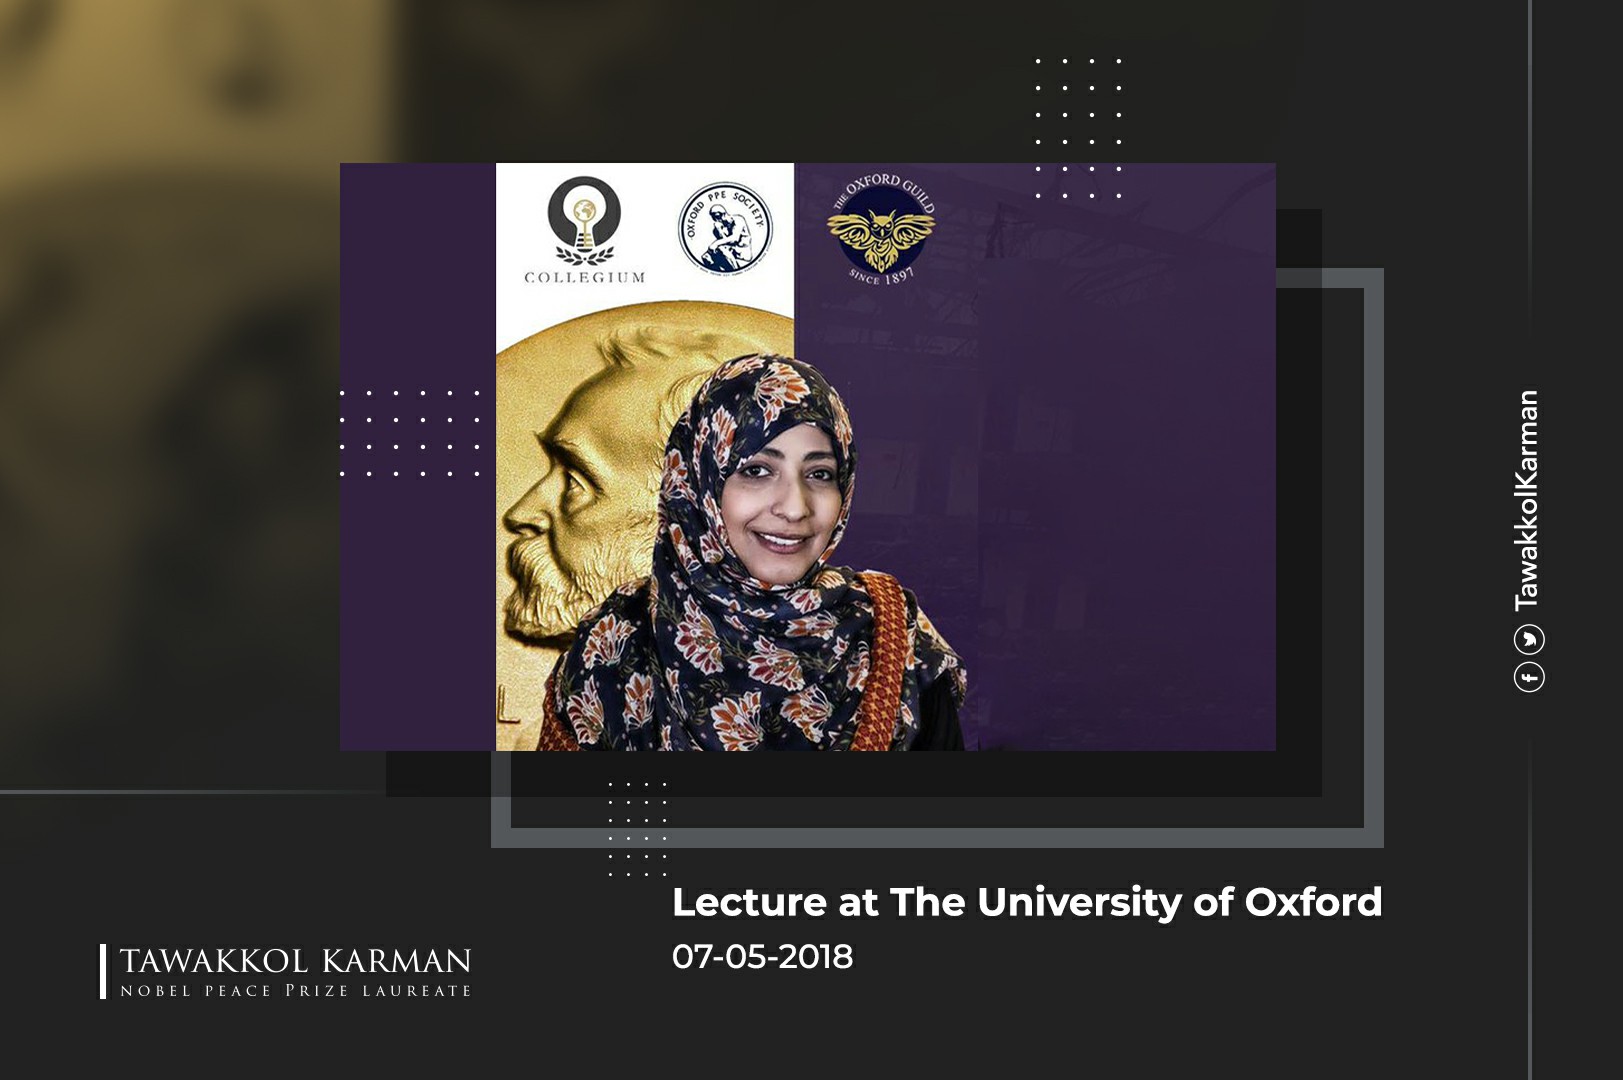 Lecture by Tawakkol Karman at The University of Oxford